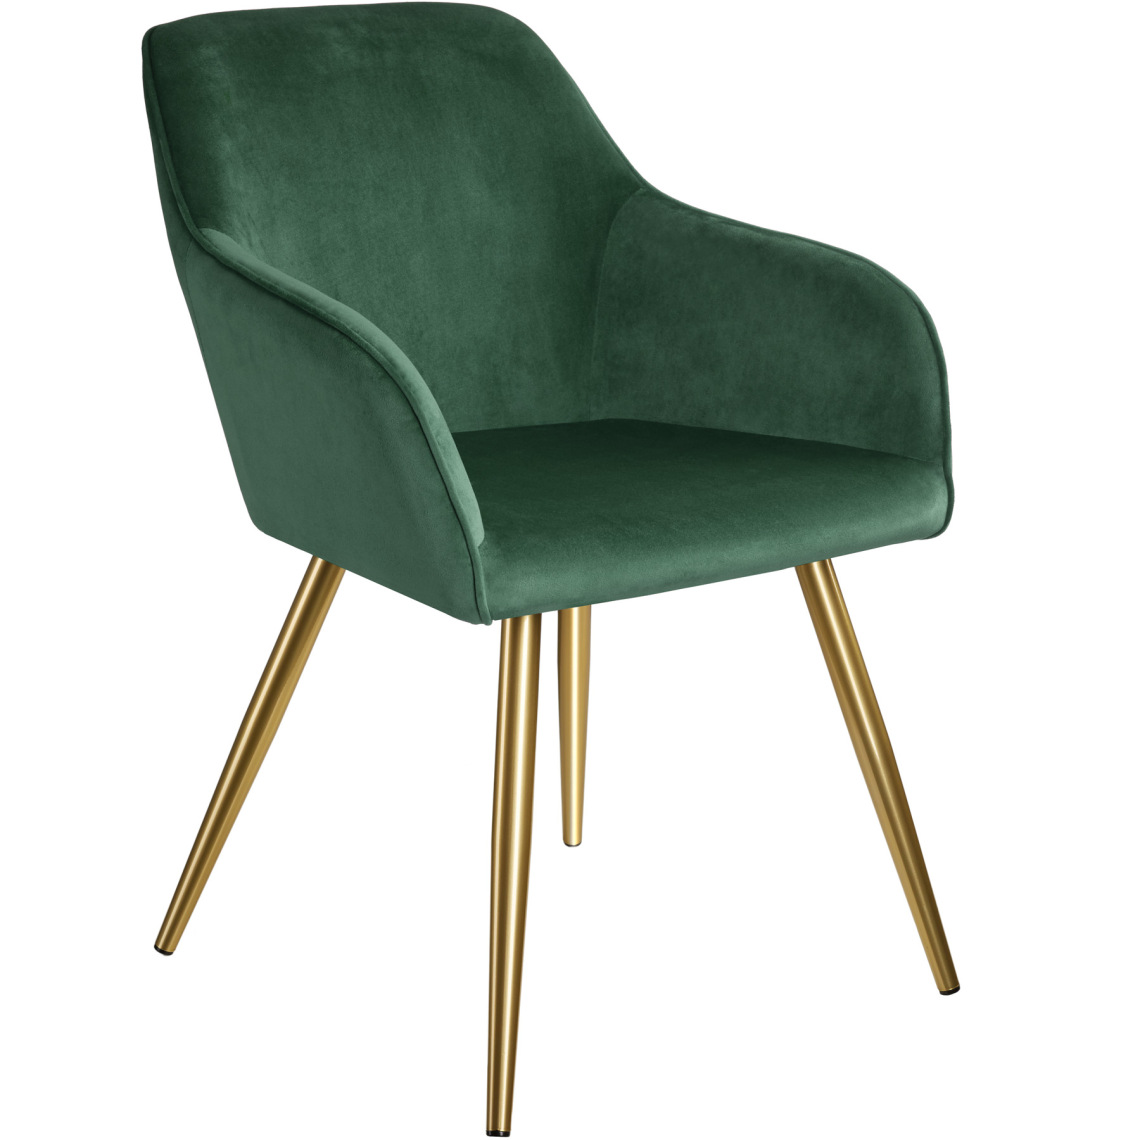 Tectake - Chaise MARILYN Effet Velours Style Scandinave - vert foncé/or - Chaises